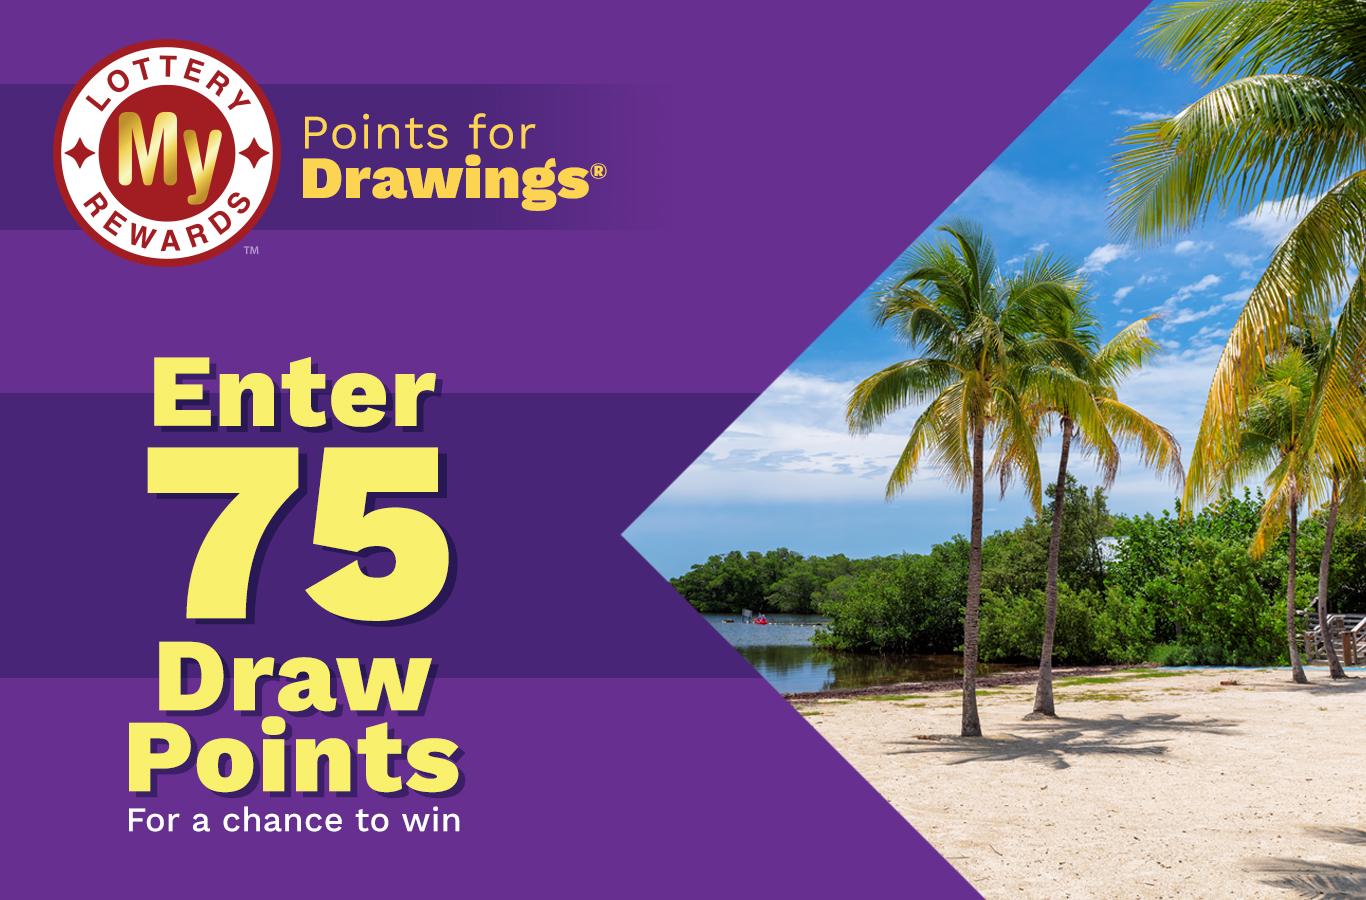 Here's your chance to win a Trip for Two to Key Largo! Enter by Monday, January 3rd.